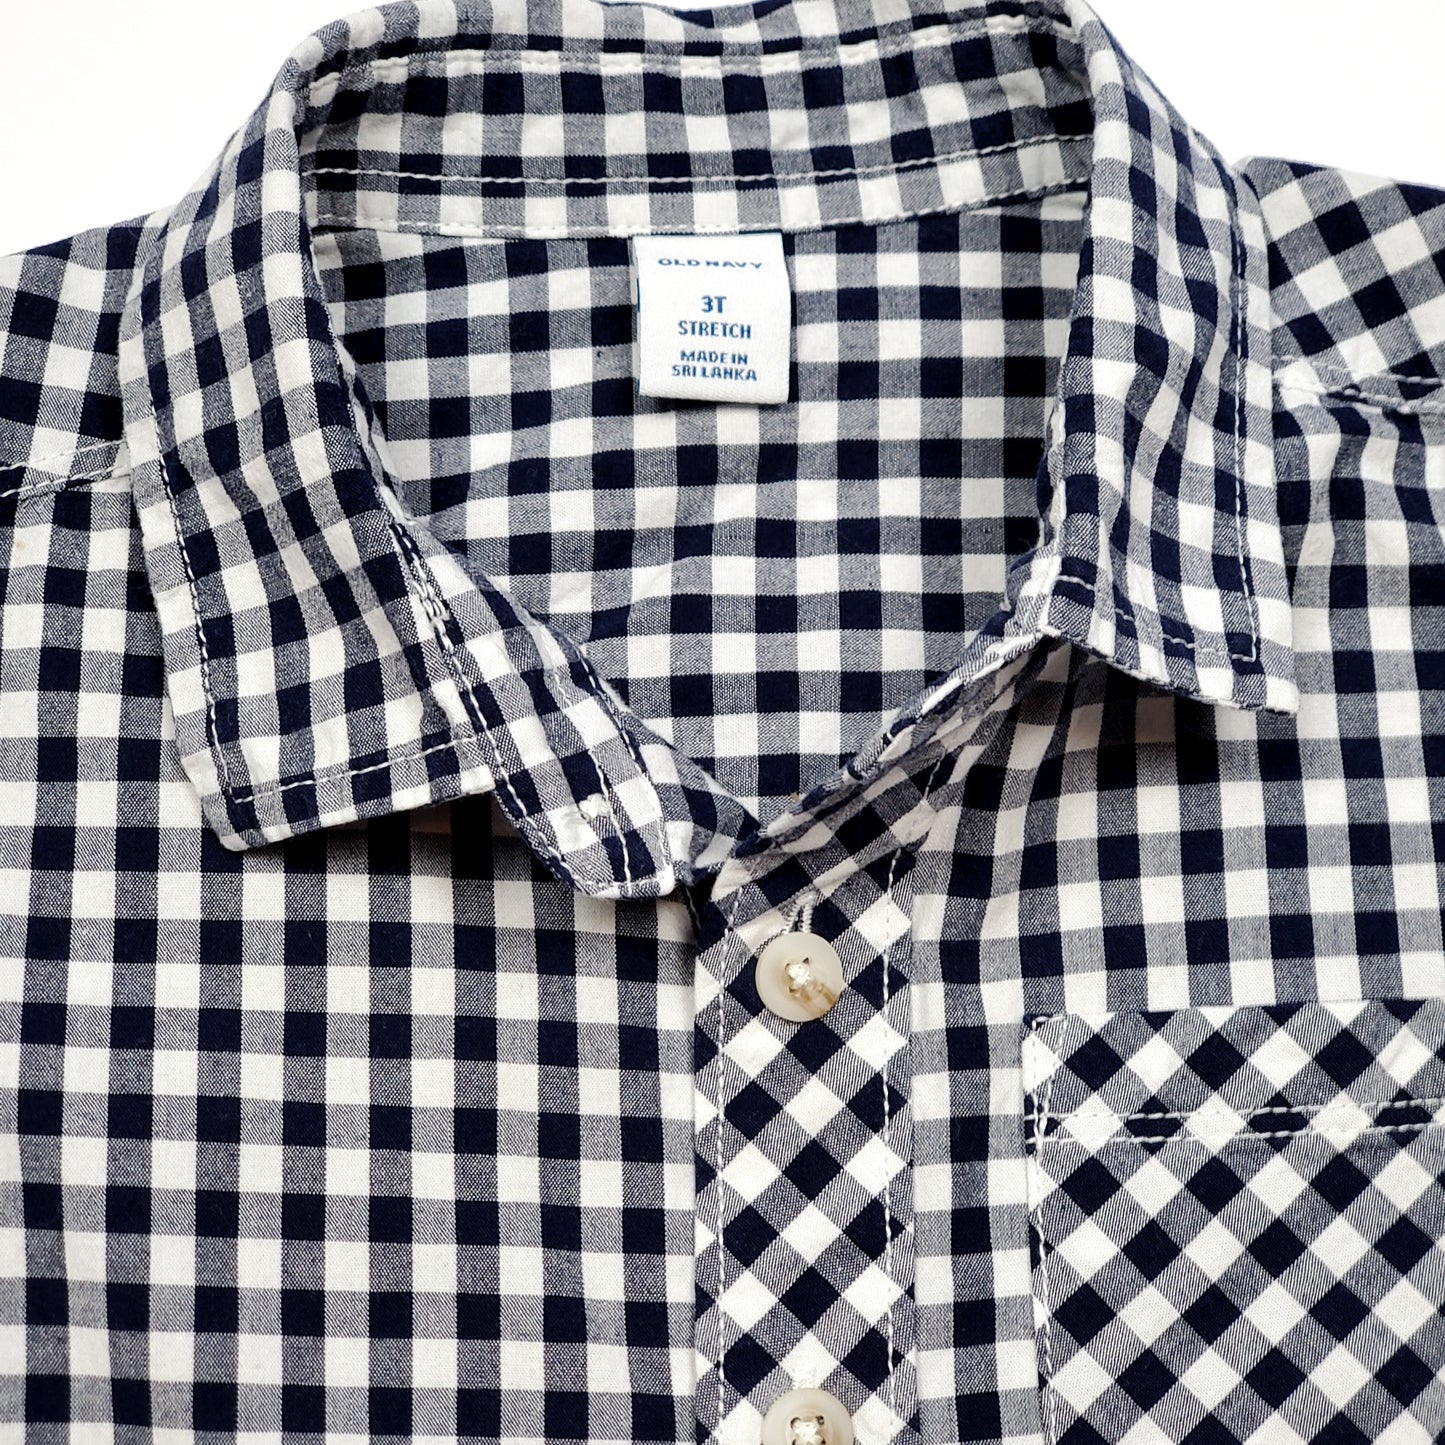 Used Old Navy Boys Navy Blue White Plaid Shirt 3T, close-up